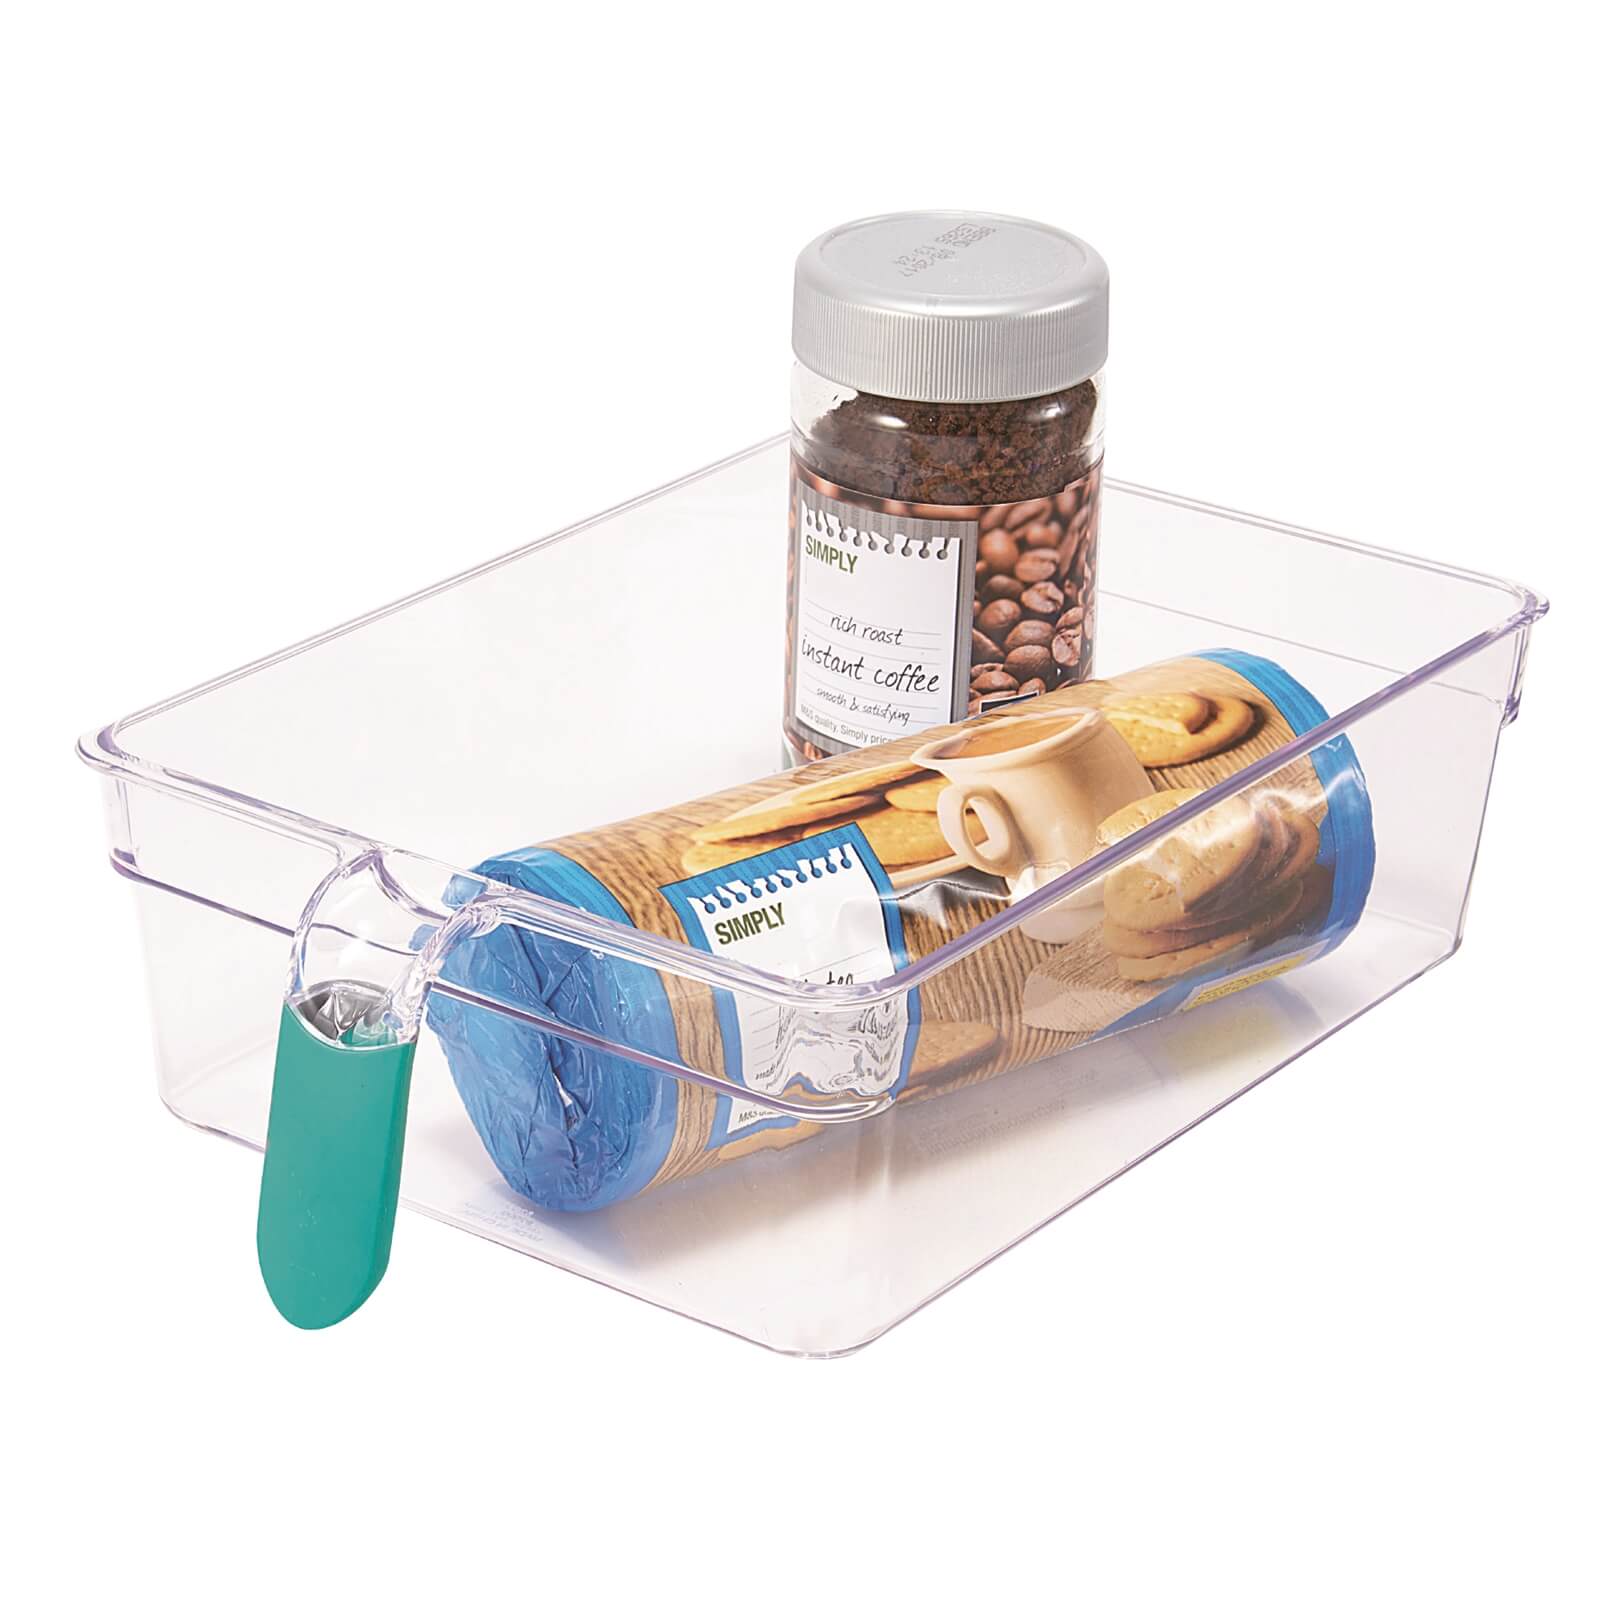 Handy Storage Caddy with Silicone Handle